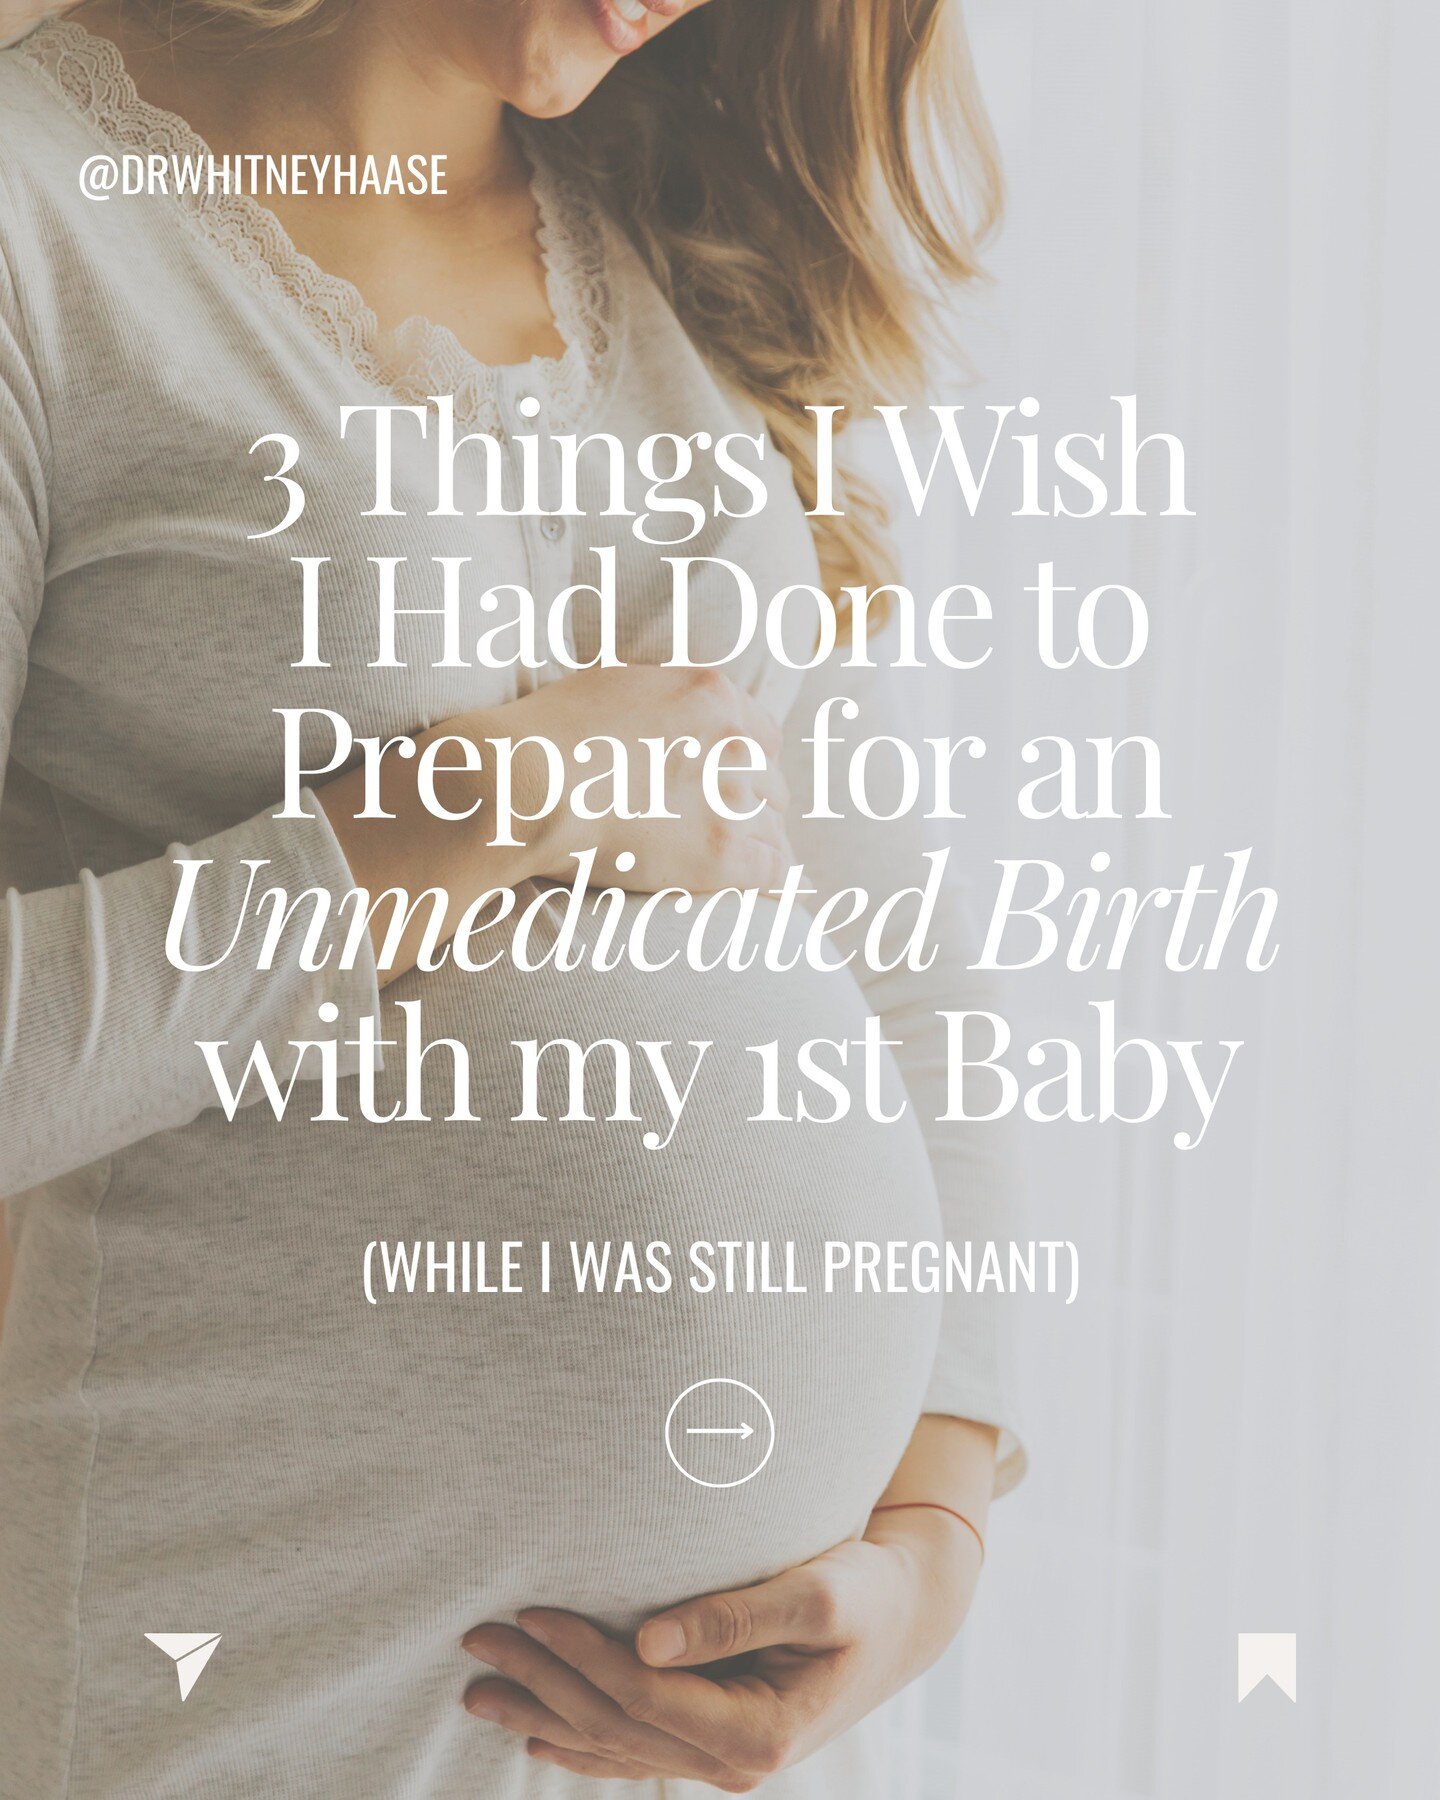 Hindsight is always 20/20, right? 

For the crunchier moms out there looking to minimize (or completely avoid) interventions during labor and birth, here are my top 3 rec's for having the unmedicated birth you want.

I didn't do ANY of these before m